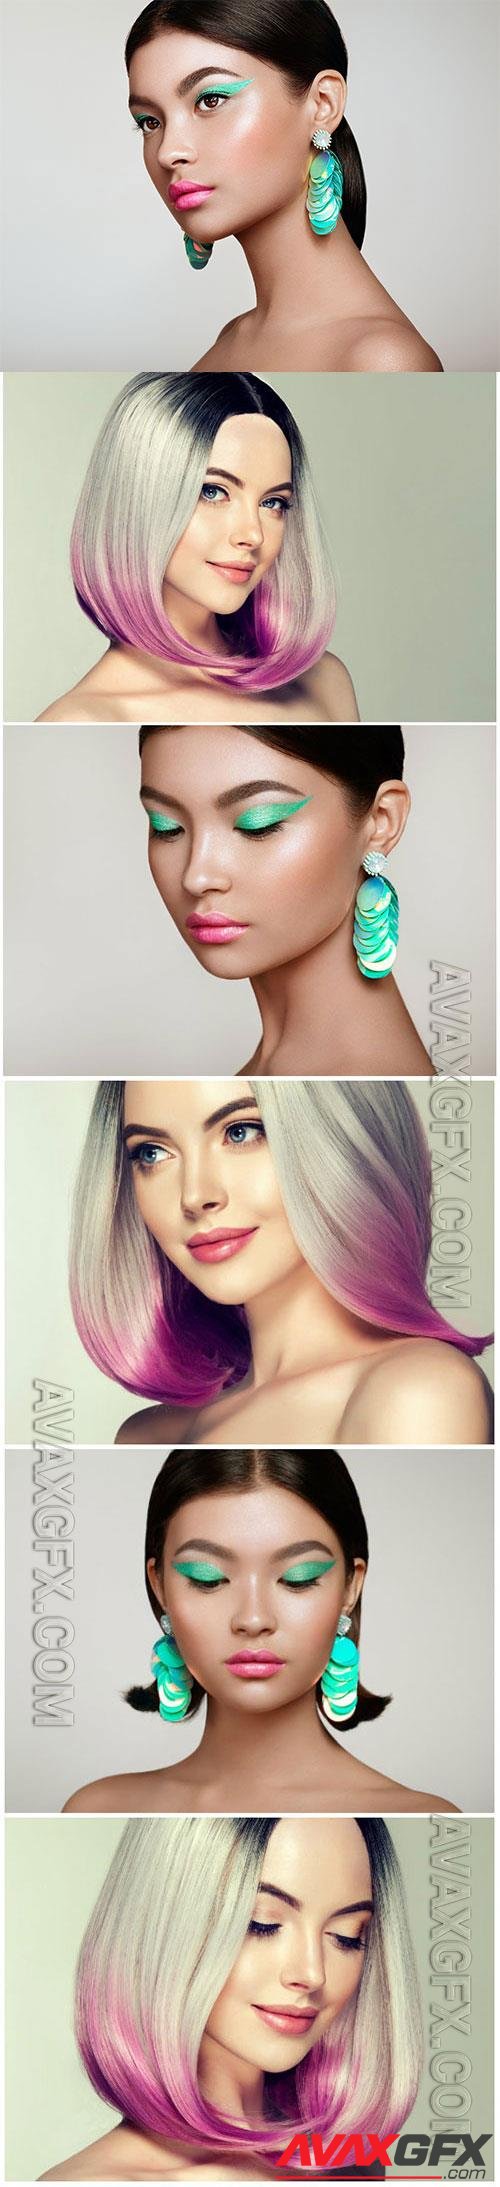 Fashion makeup and haircuts for women stock photo